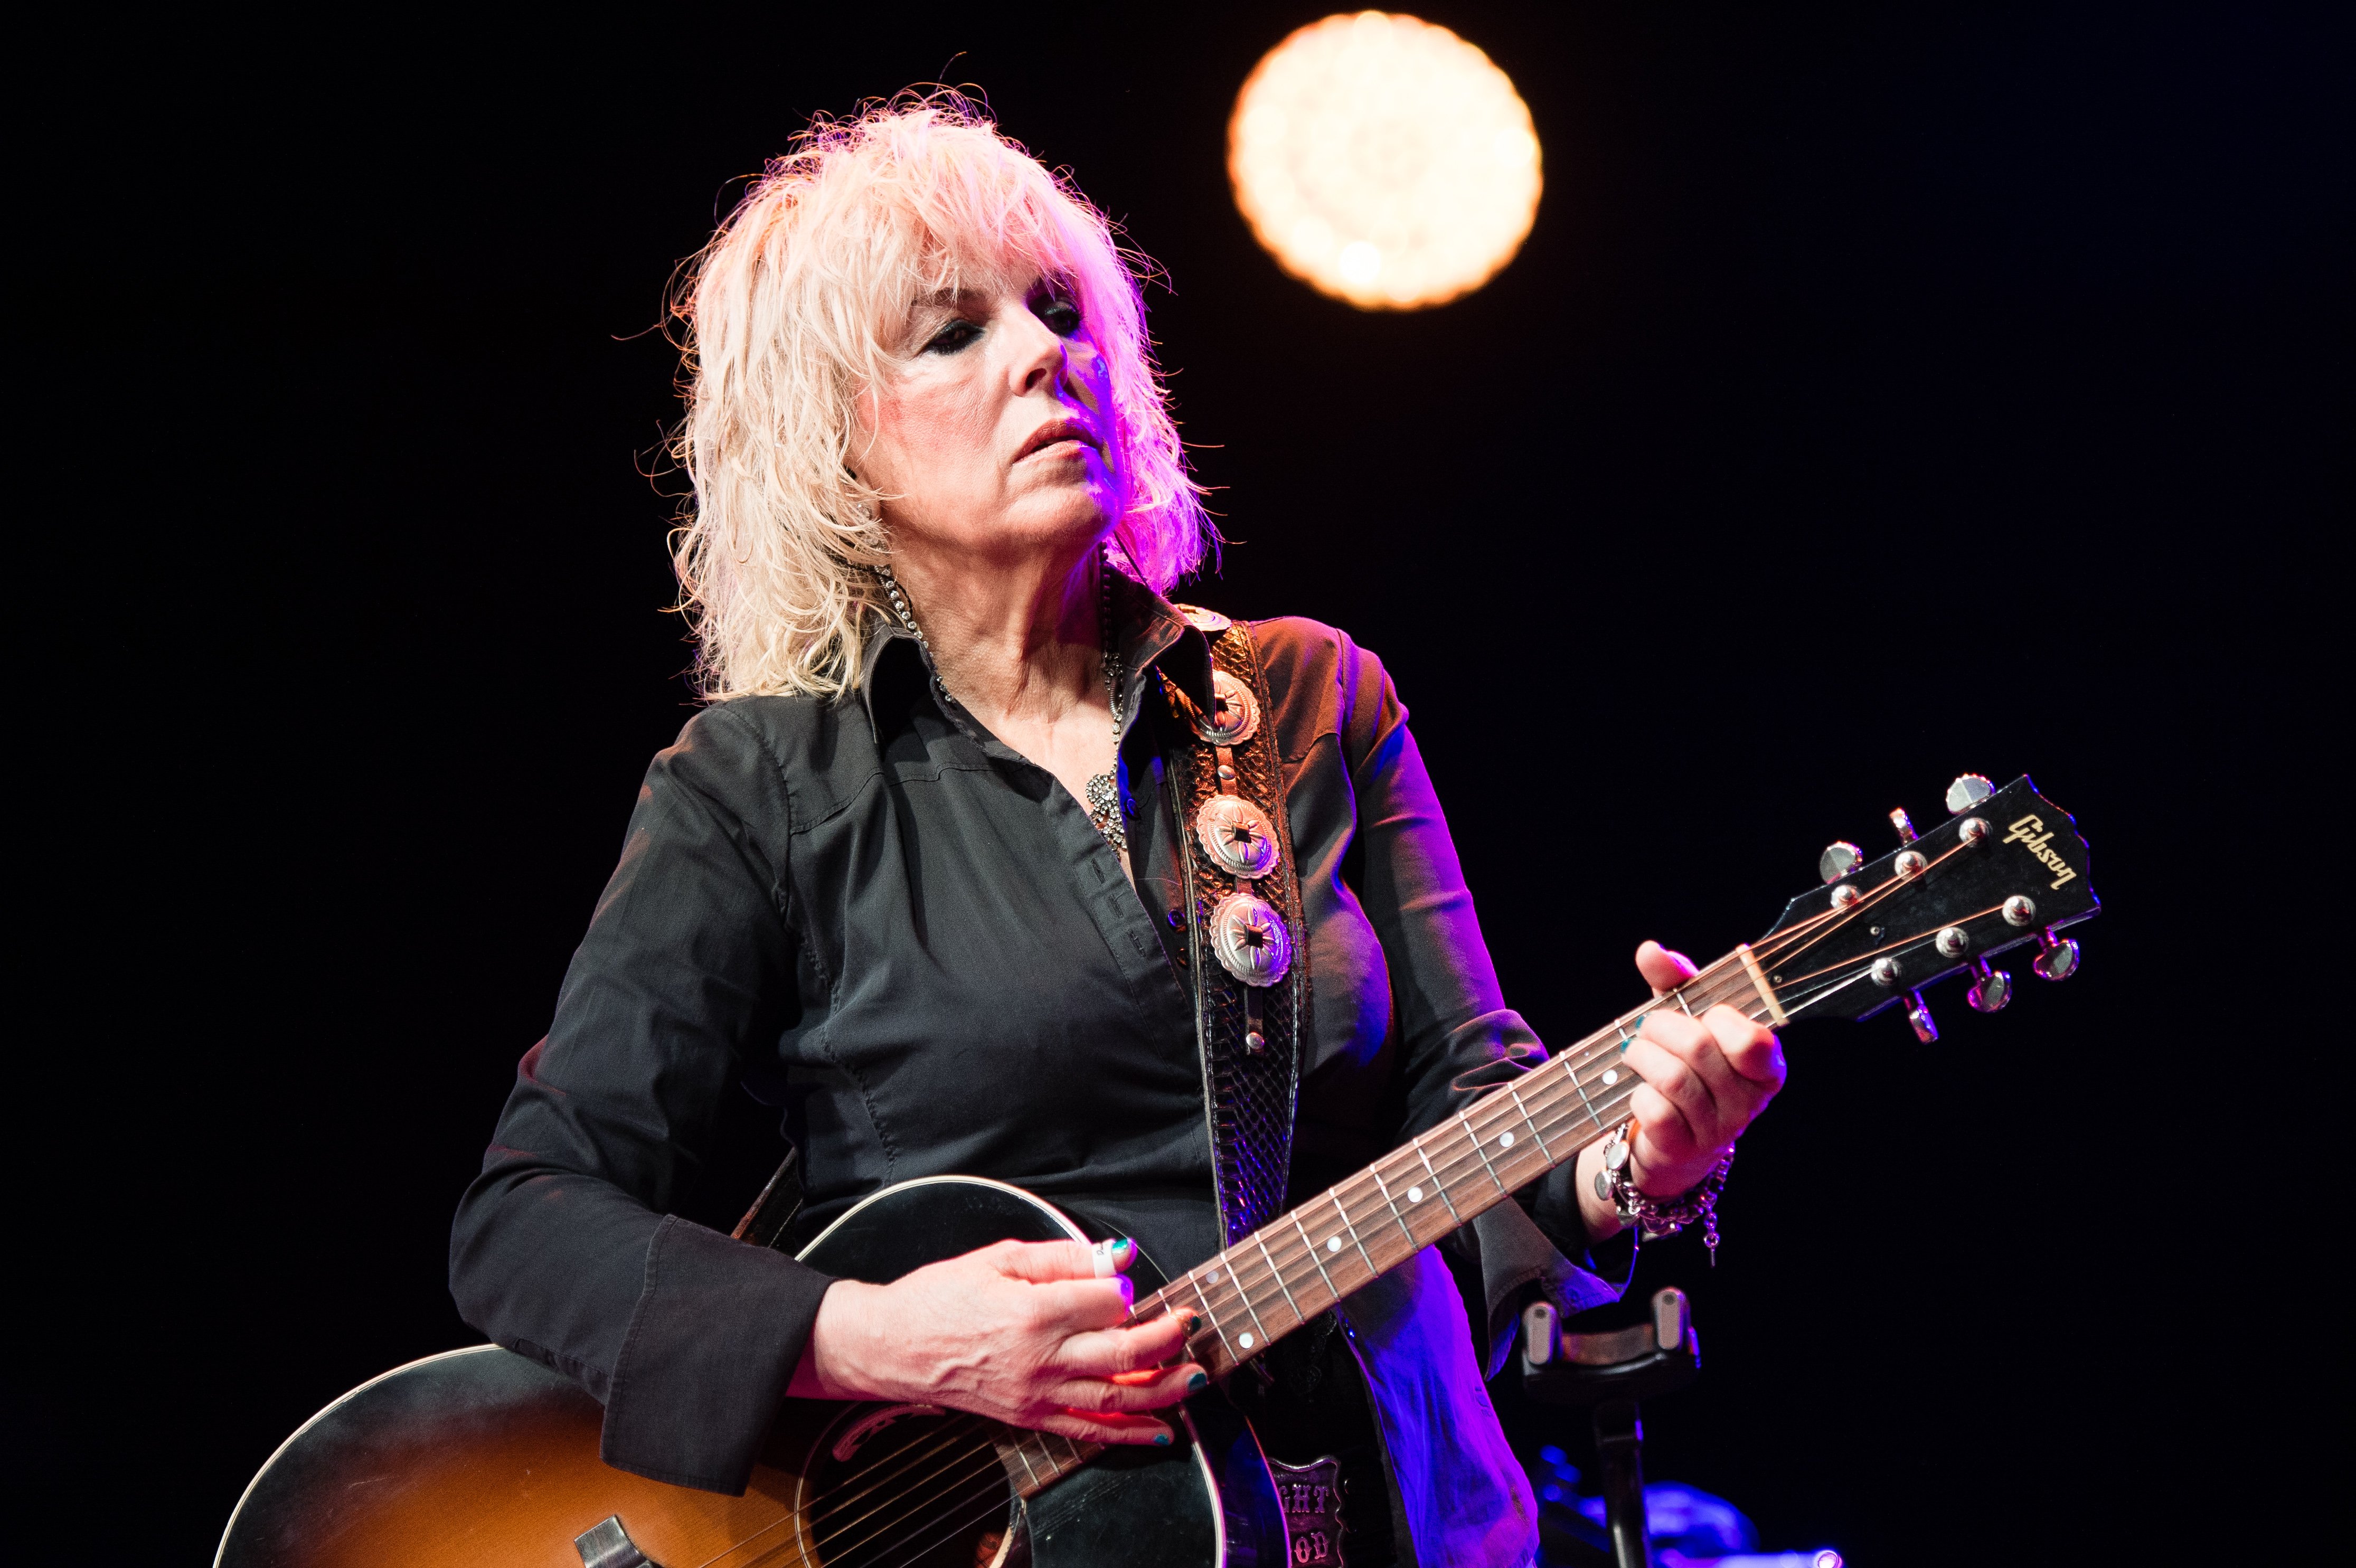 Lucinda Williams pictured on stage during the Cambridge Folk Festival 2019, Cambridge, England. | Photo: Getty Images